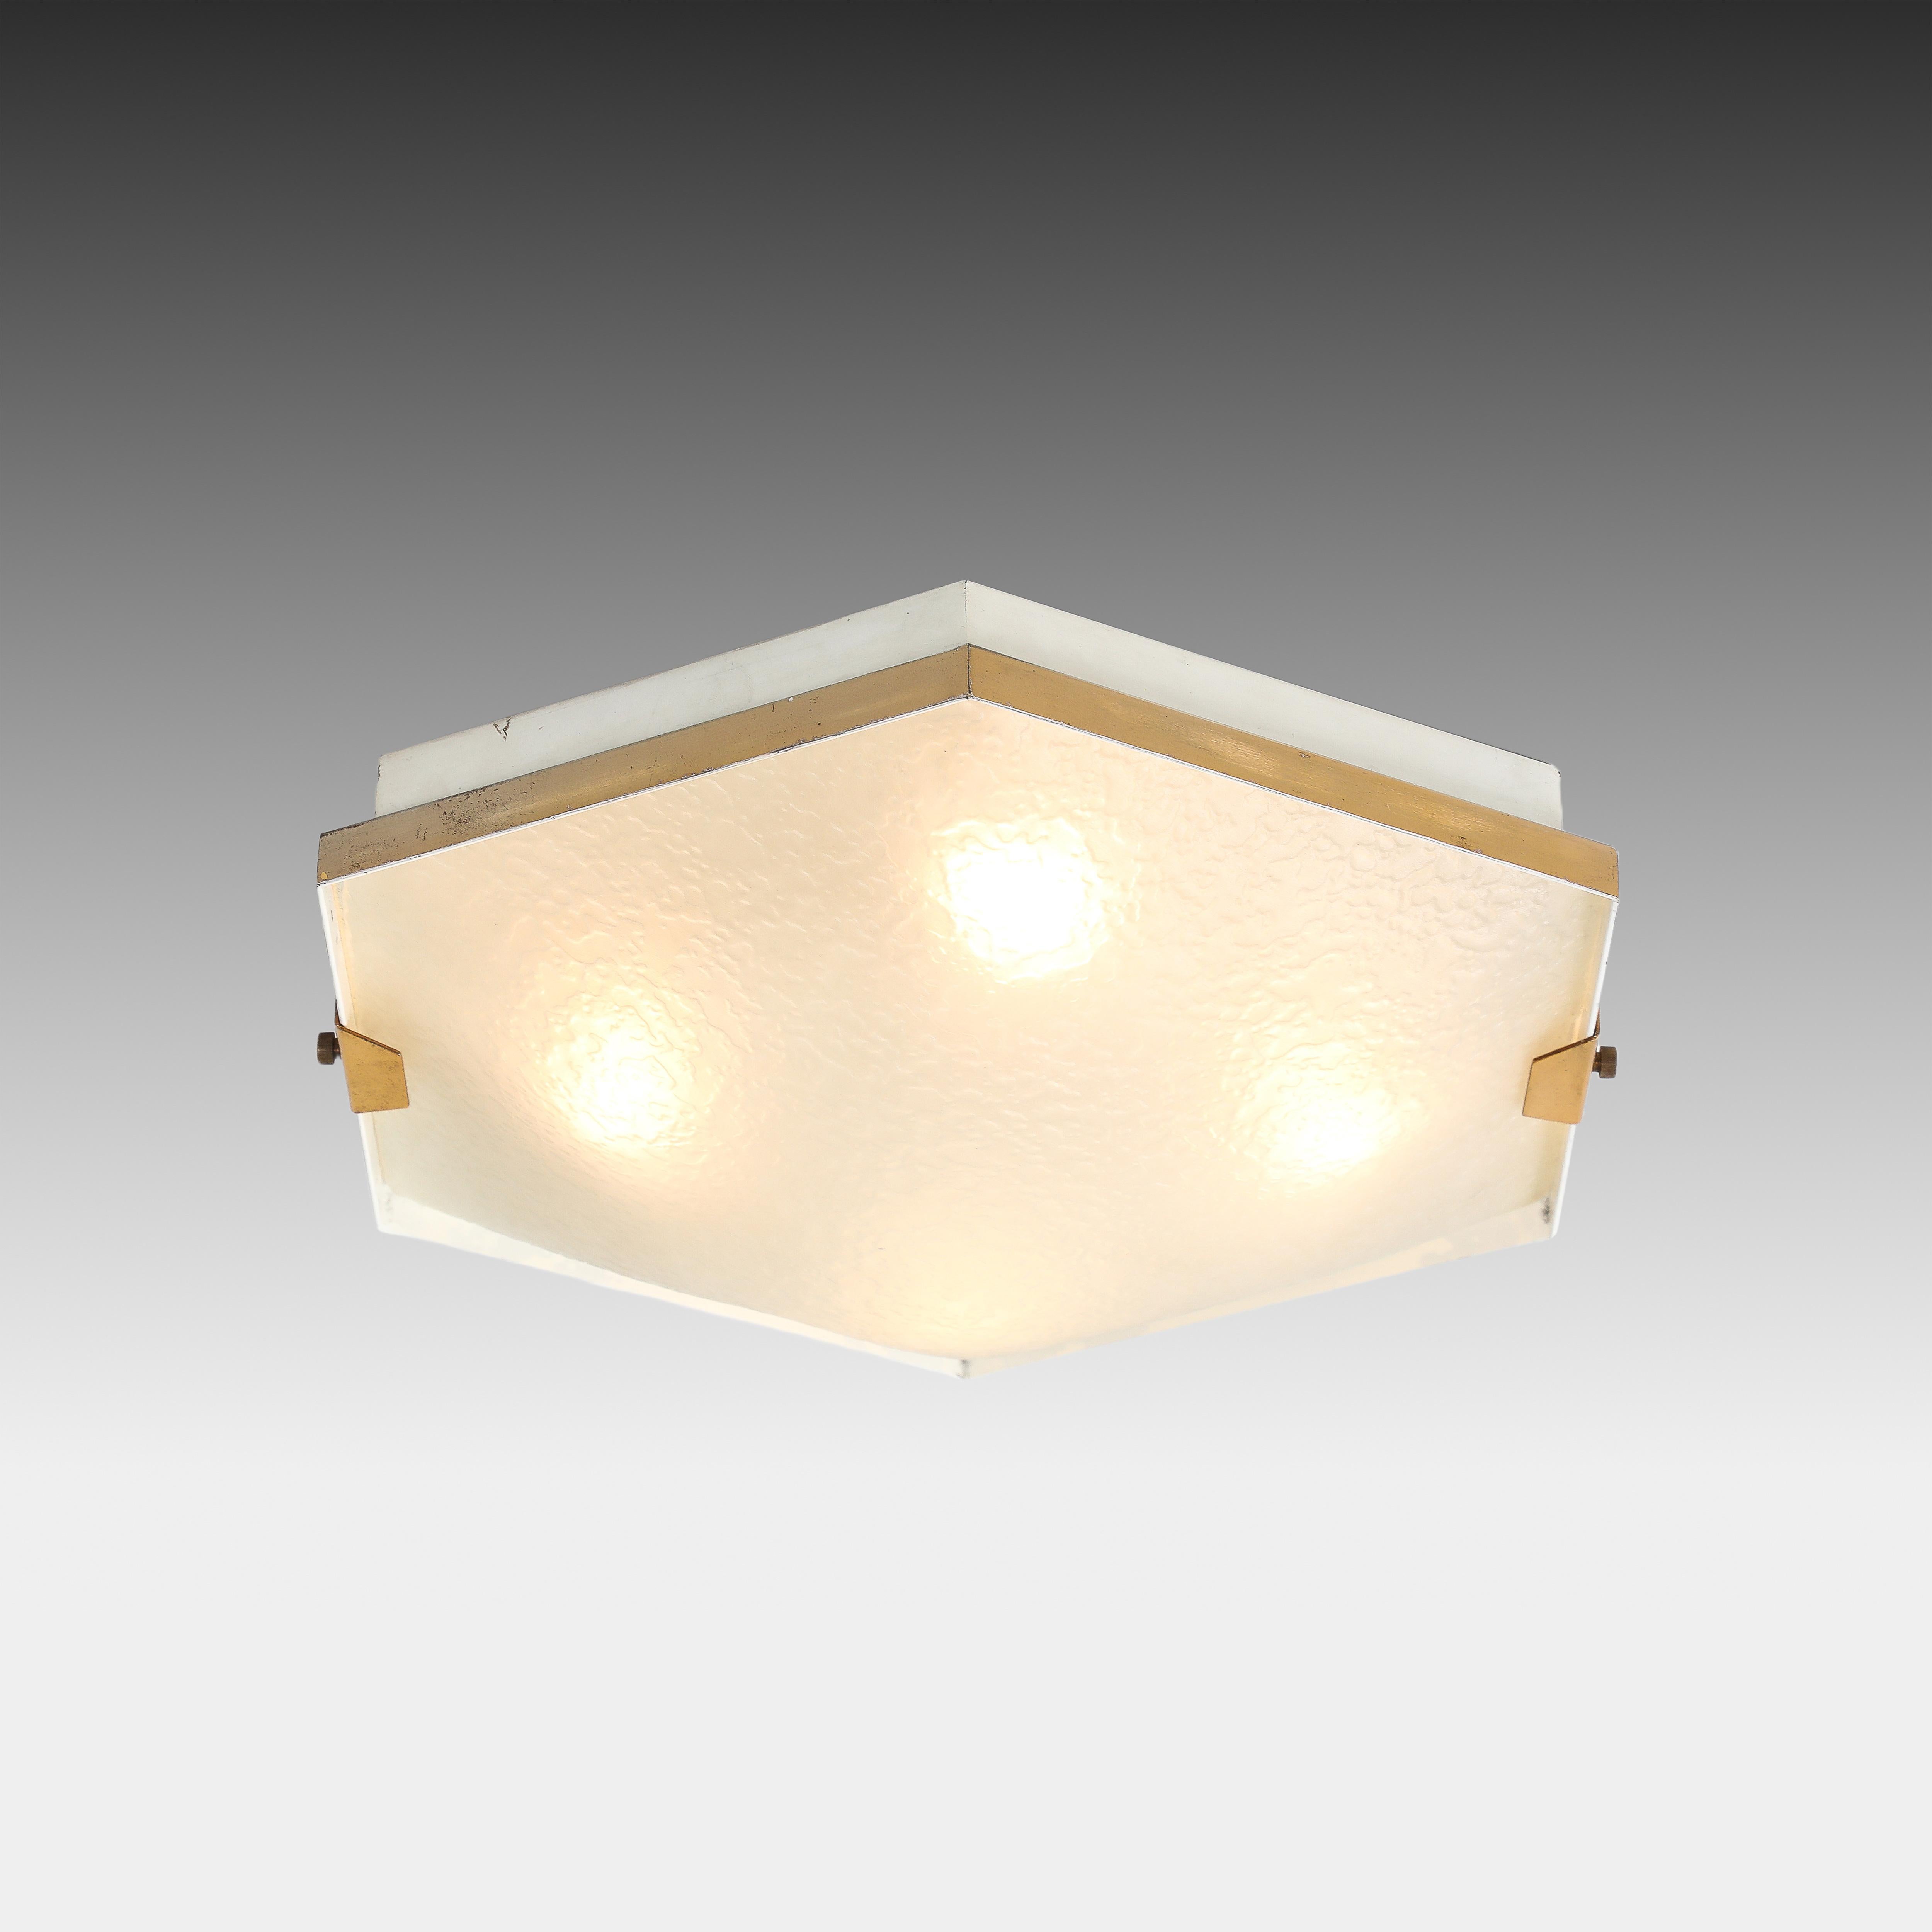 1960s Stilnovo hexagonal flush mount ceiling light with white enameled metal structure, textured glass diffuser, and brass mounts.  
Stamped 'STILNOVO' on inside of metal structure.